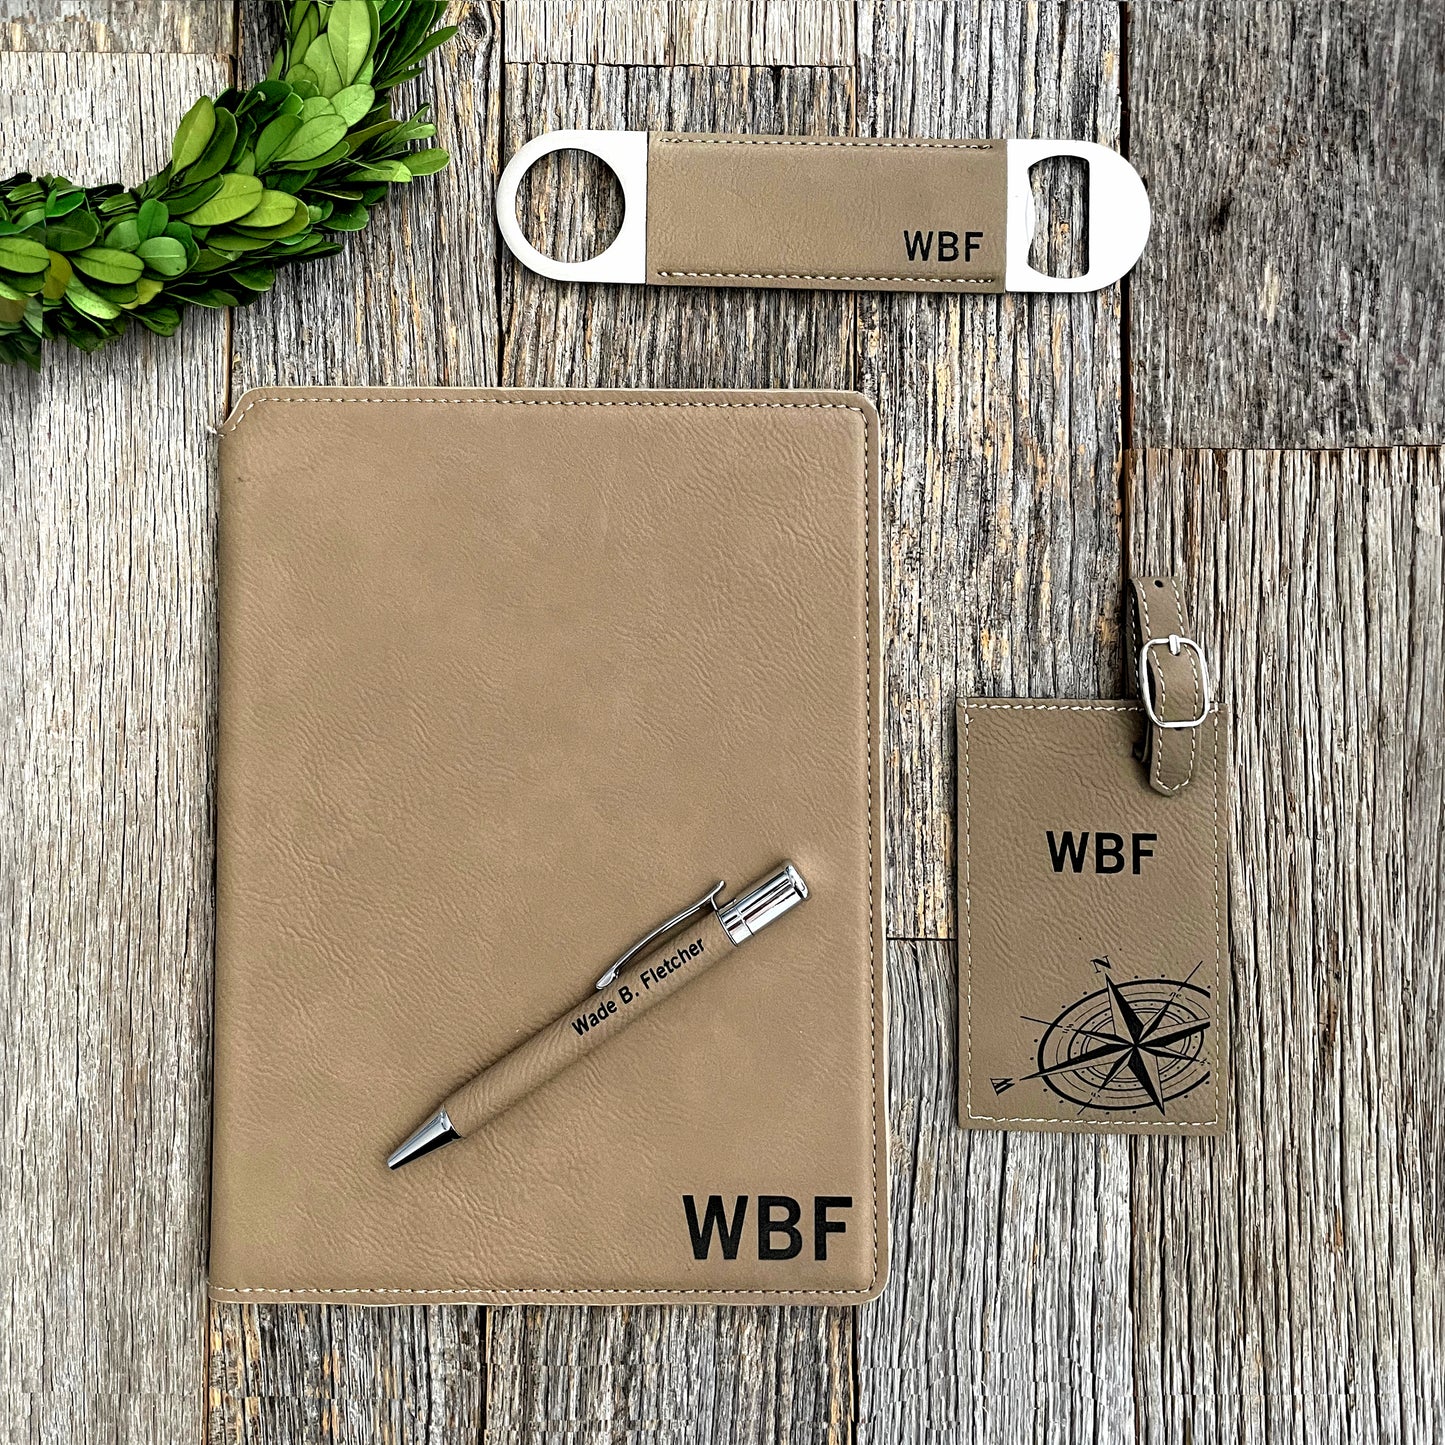 Custom engraved leatherette notebook for Graduates, Guys, Grooms, Father's Day gift